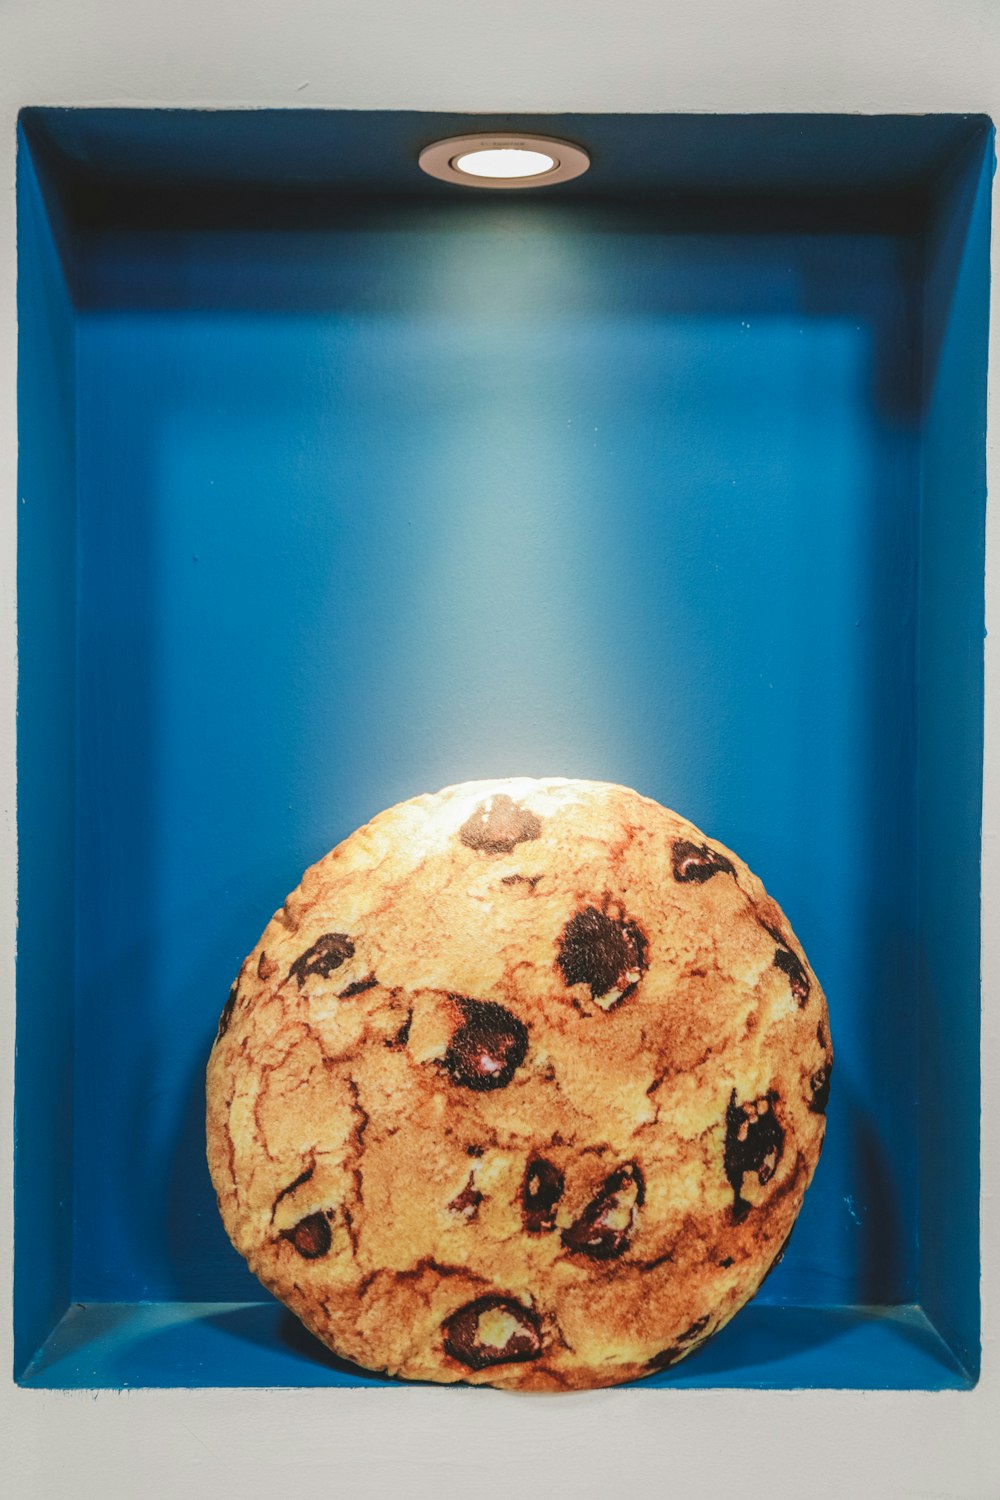 chocolate chip cookie inside lighted box